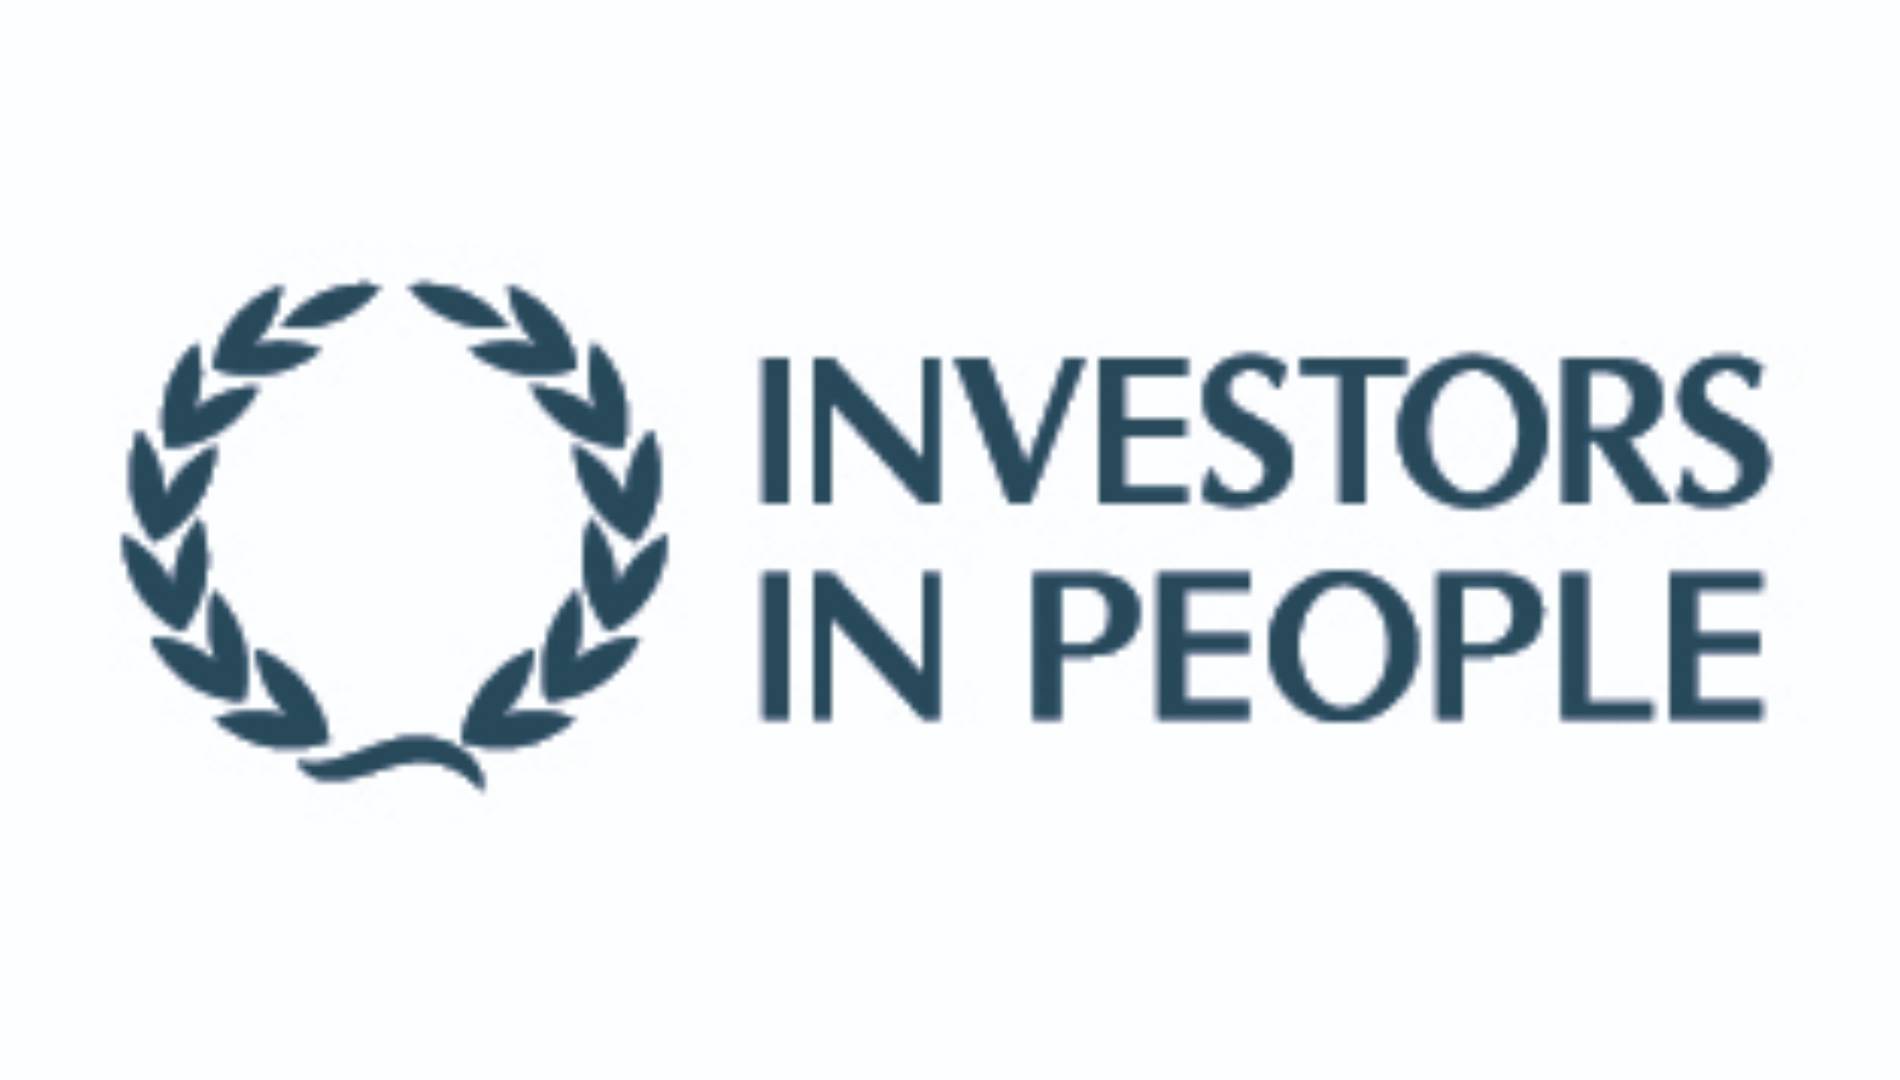 West Way Accredited as an Investor in People